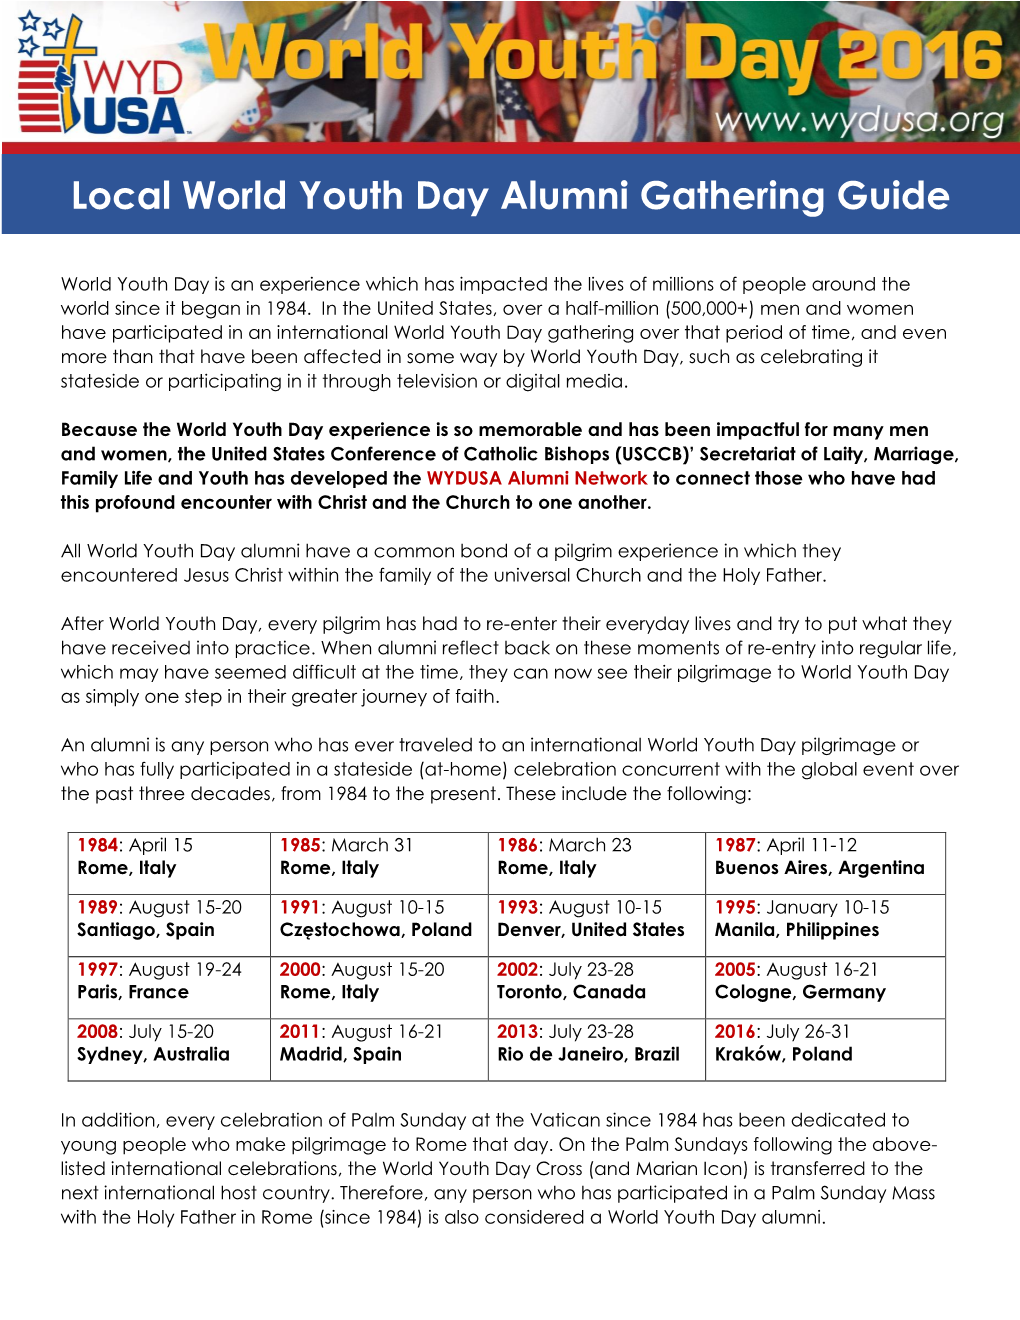 Local World Youth Day Alumni Gathering Guide